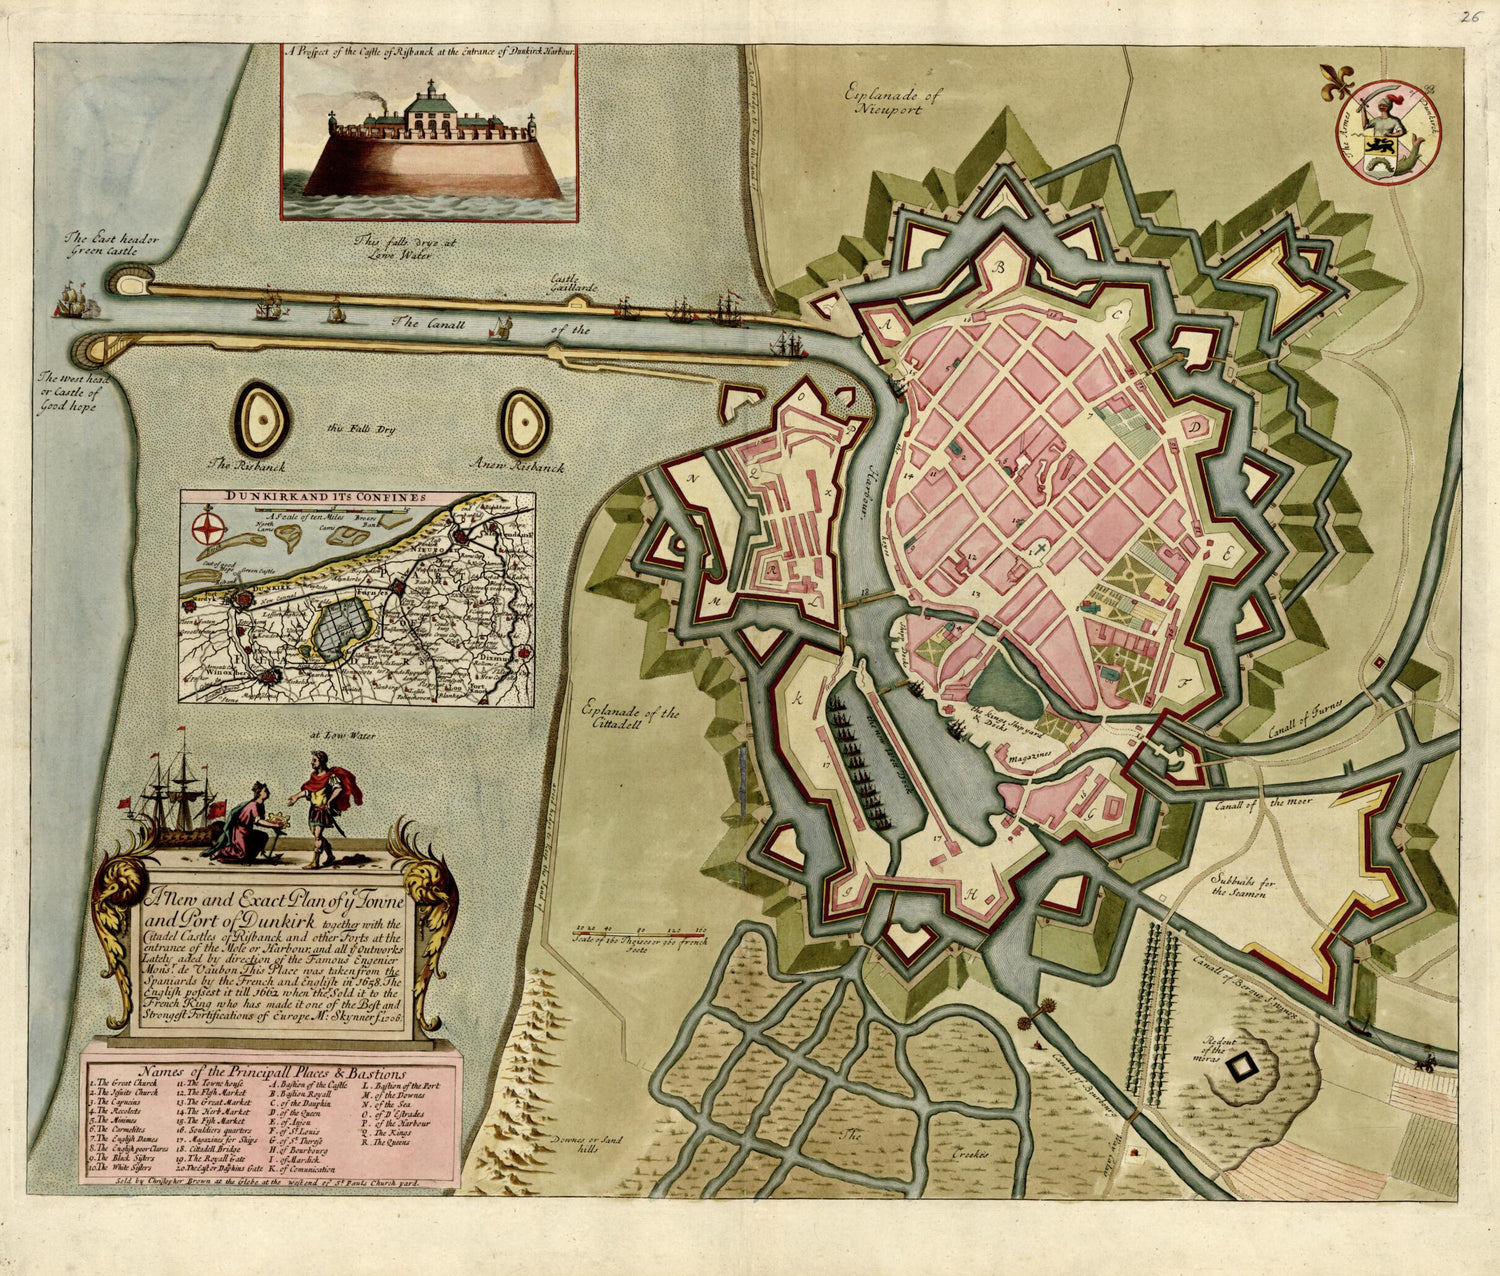 This old map of A New and Exact Plan of Ye Towne and Port of Dunkirk from a Collection of Plans of Fortifications and Battles, 1684-from 1709 from 1709 was created by Anna Beeck in 1709